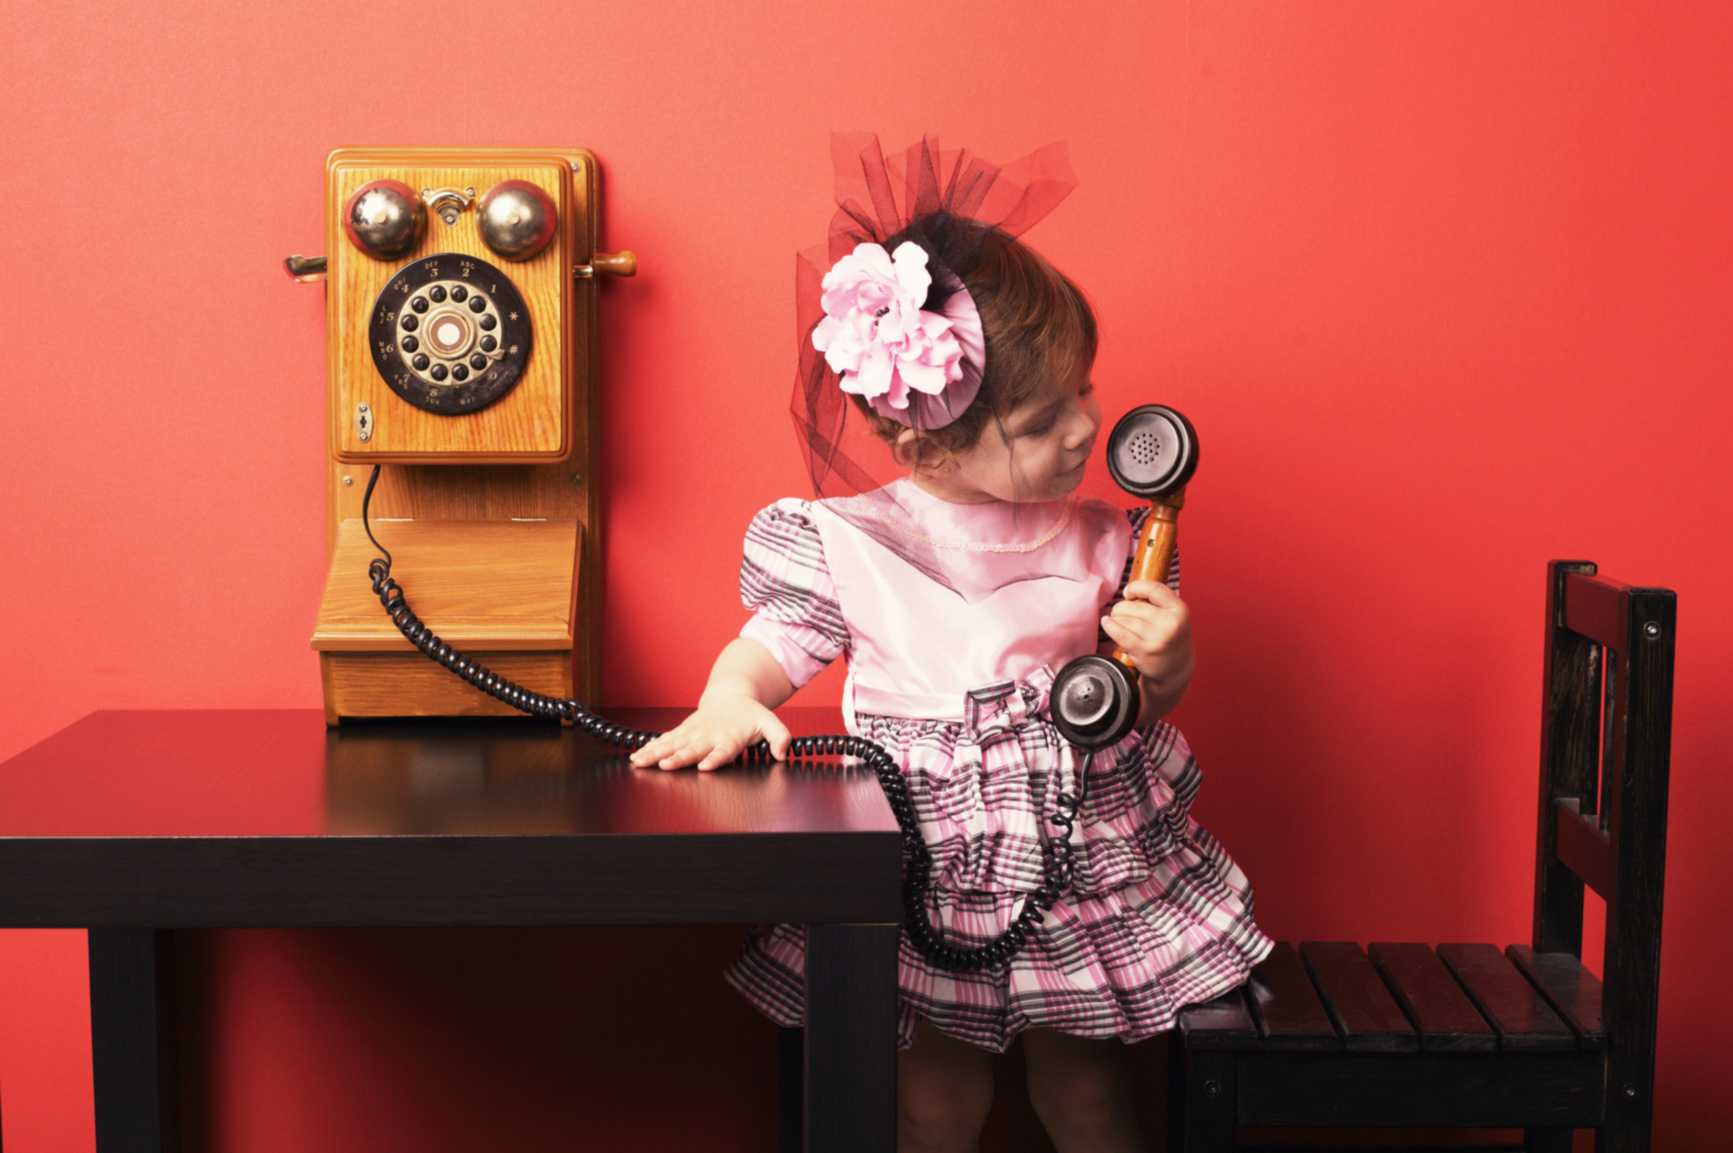 Little girl standing on chair, holding and looking at receiver of an old-fashioned wall phone.